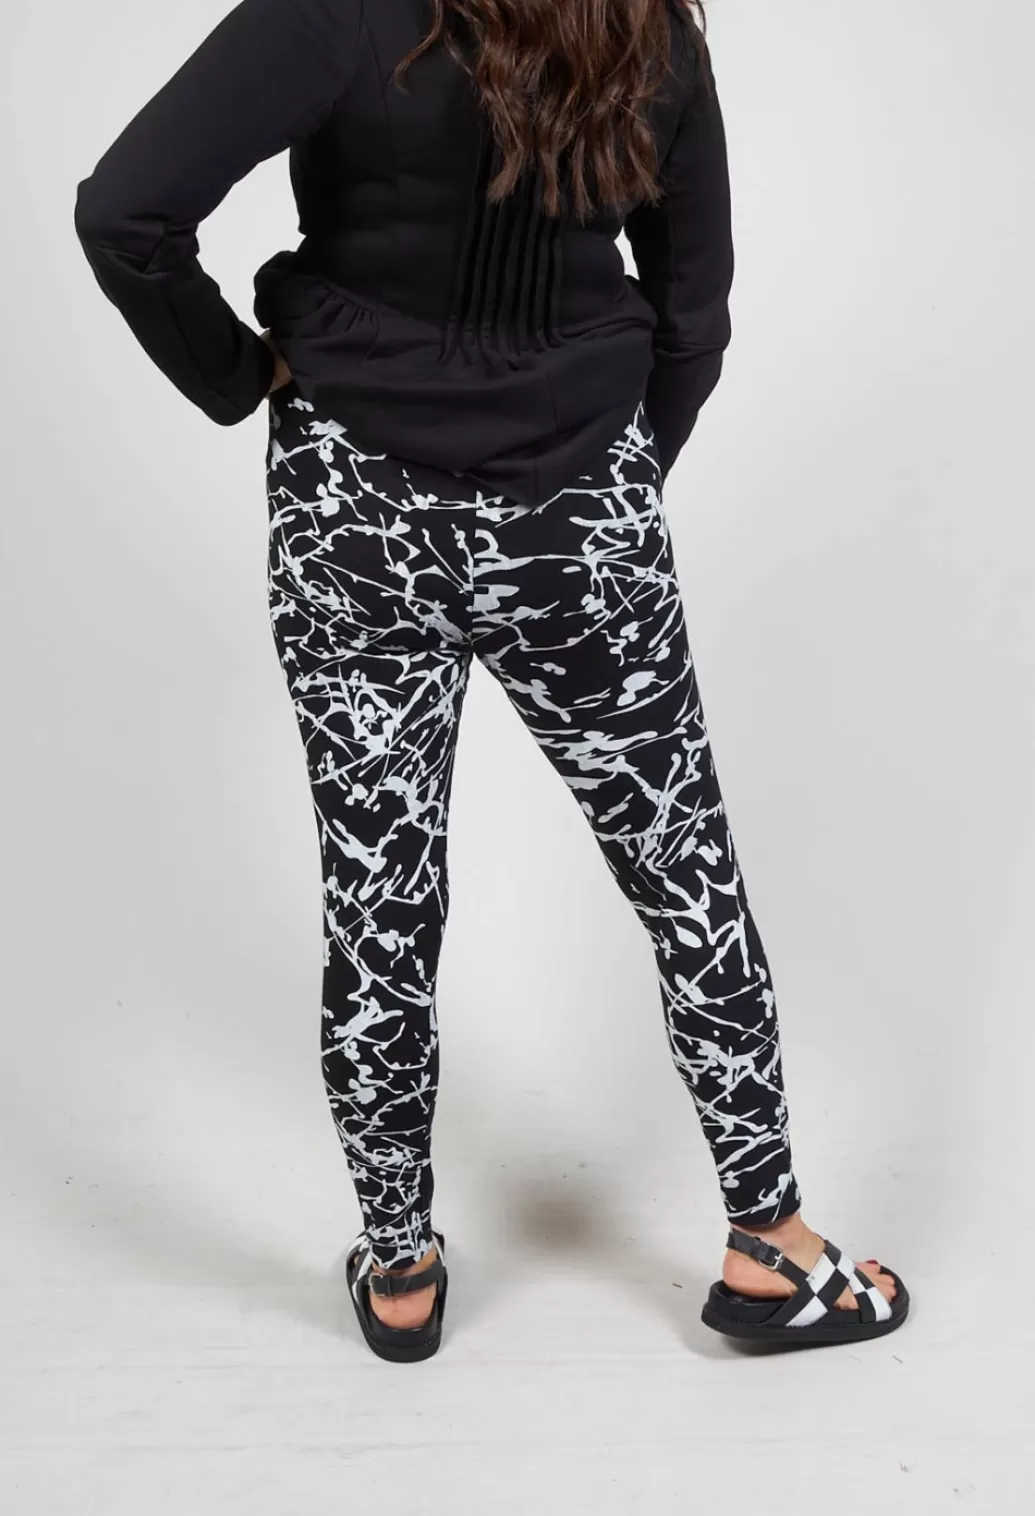 Leggings^Bread and Butter Ankle Cropped Leggings In Black With White Print